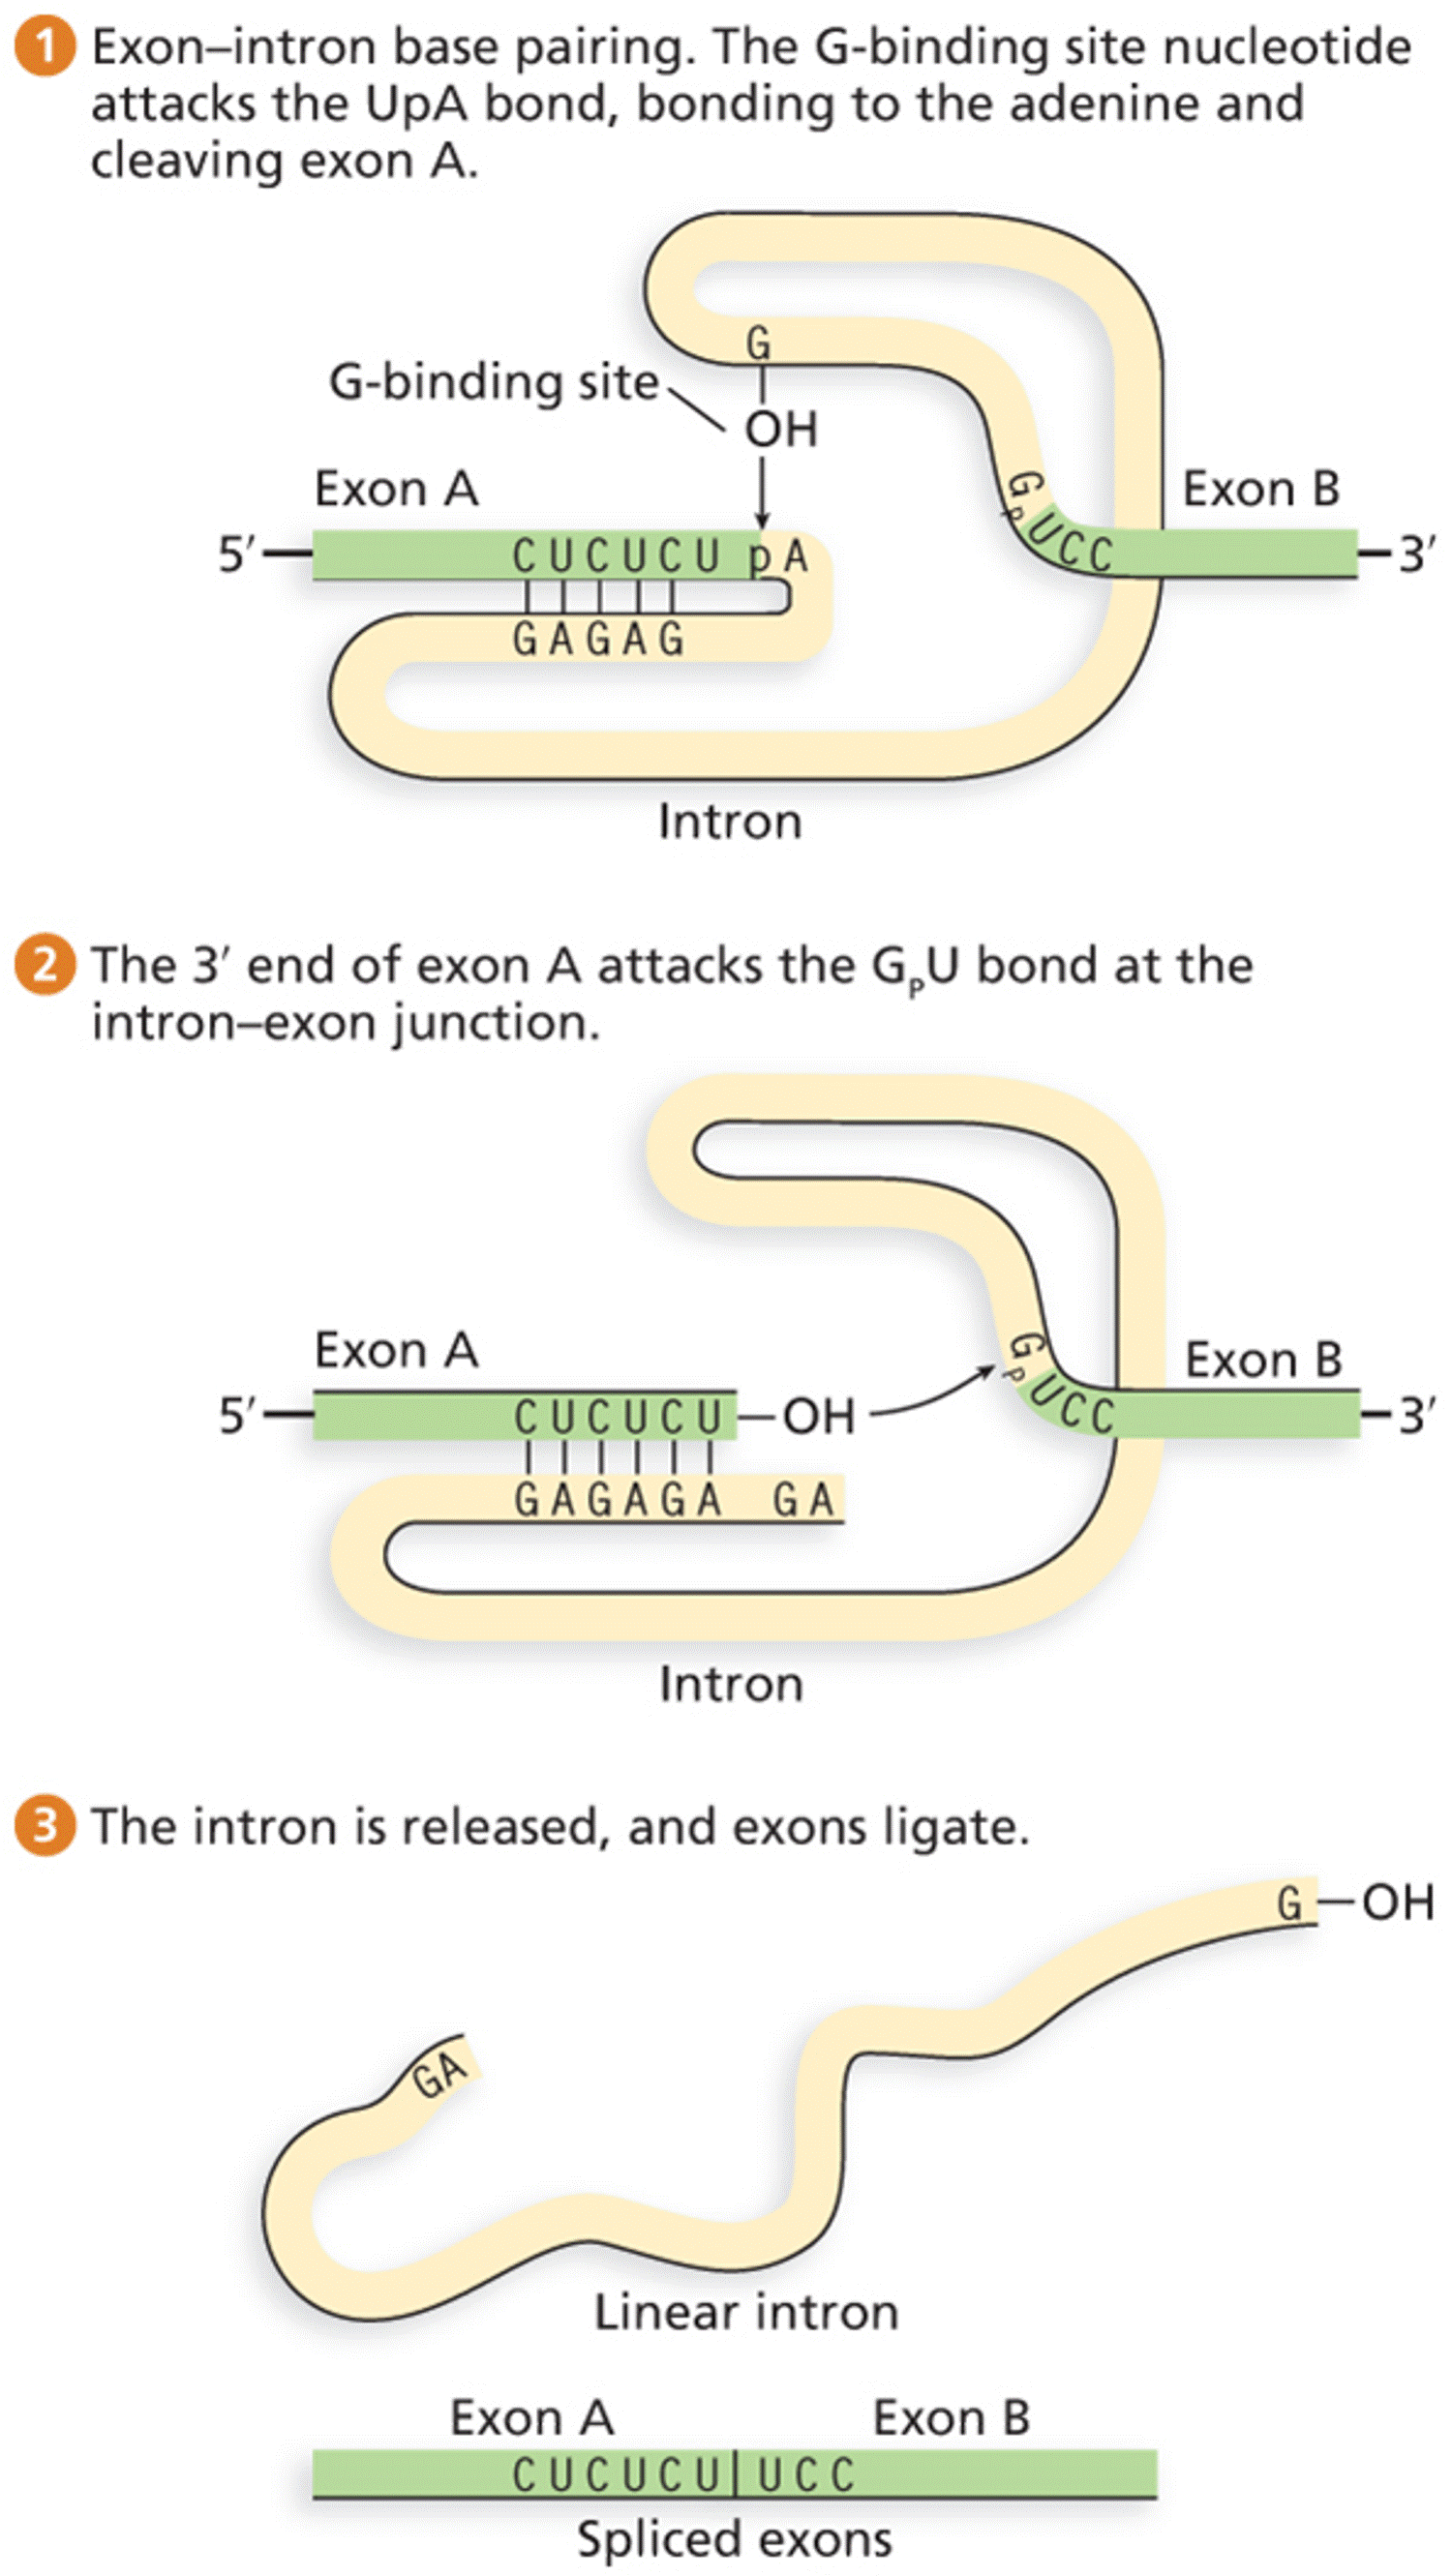 Self-splicing of group I introns